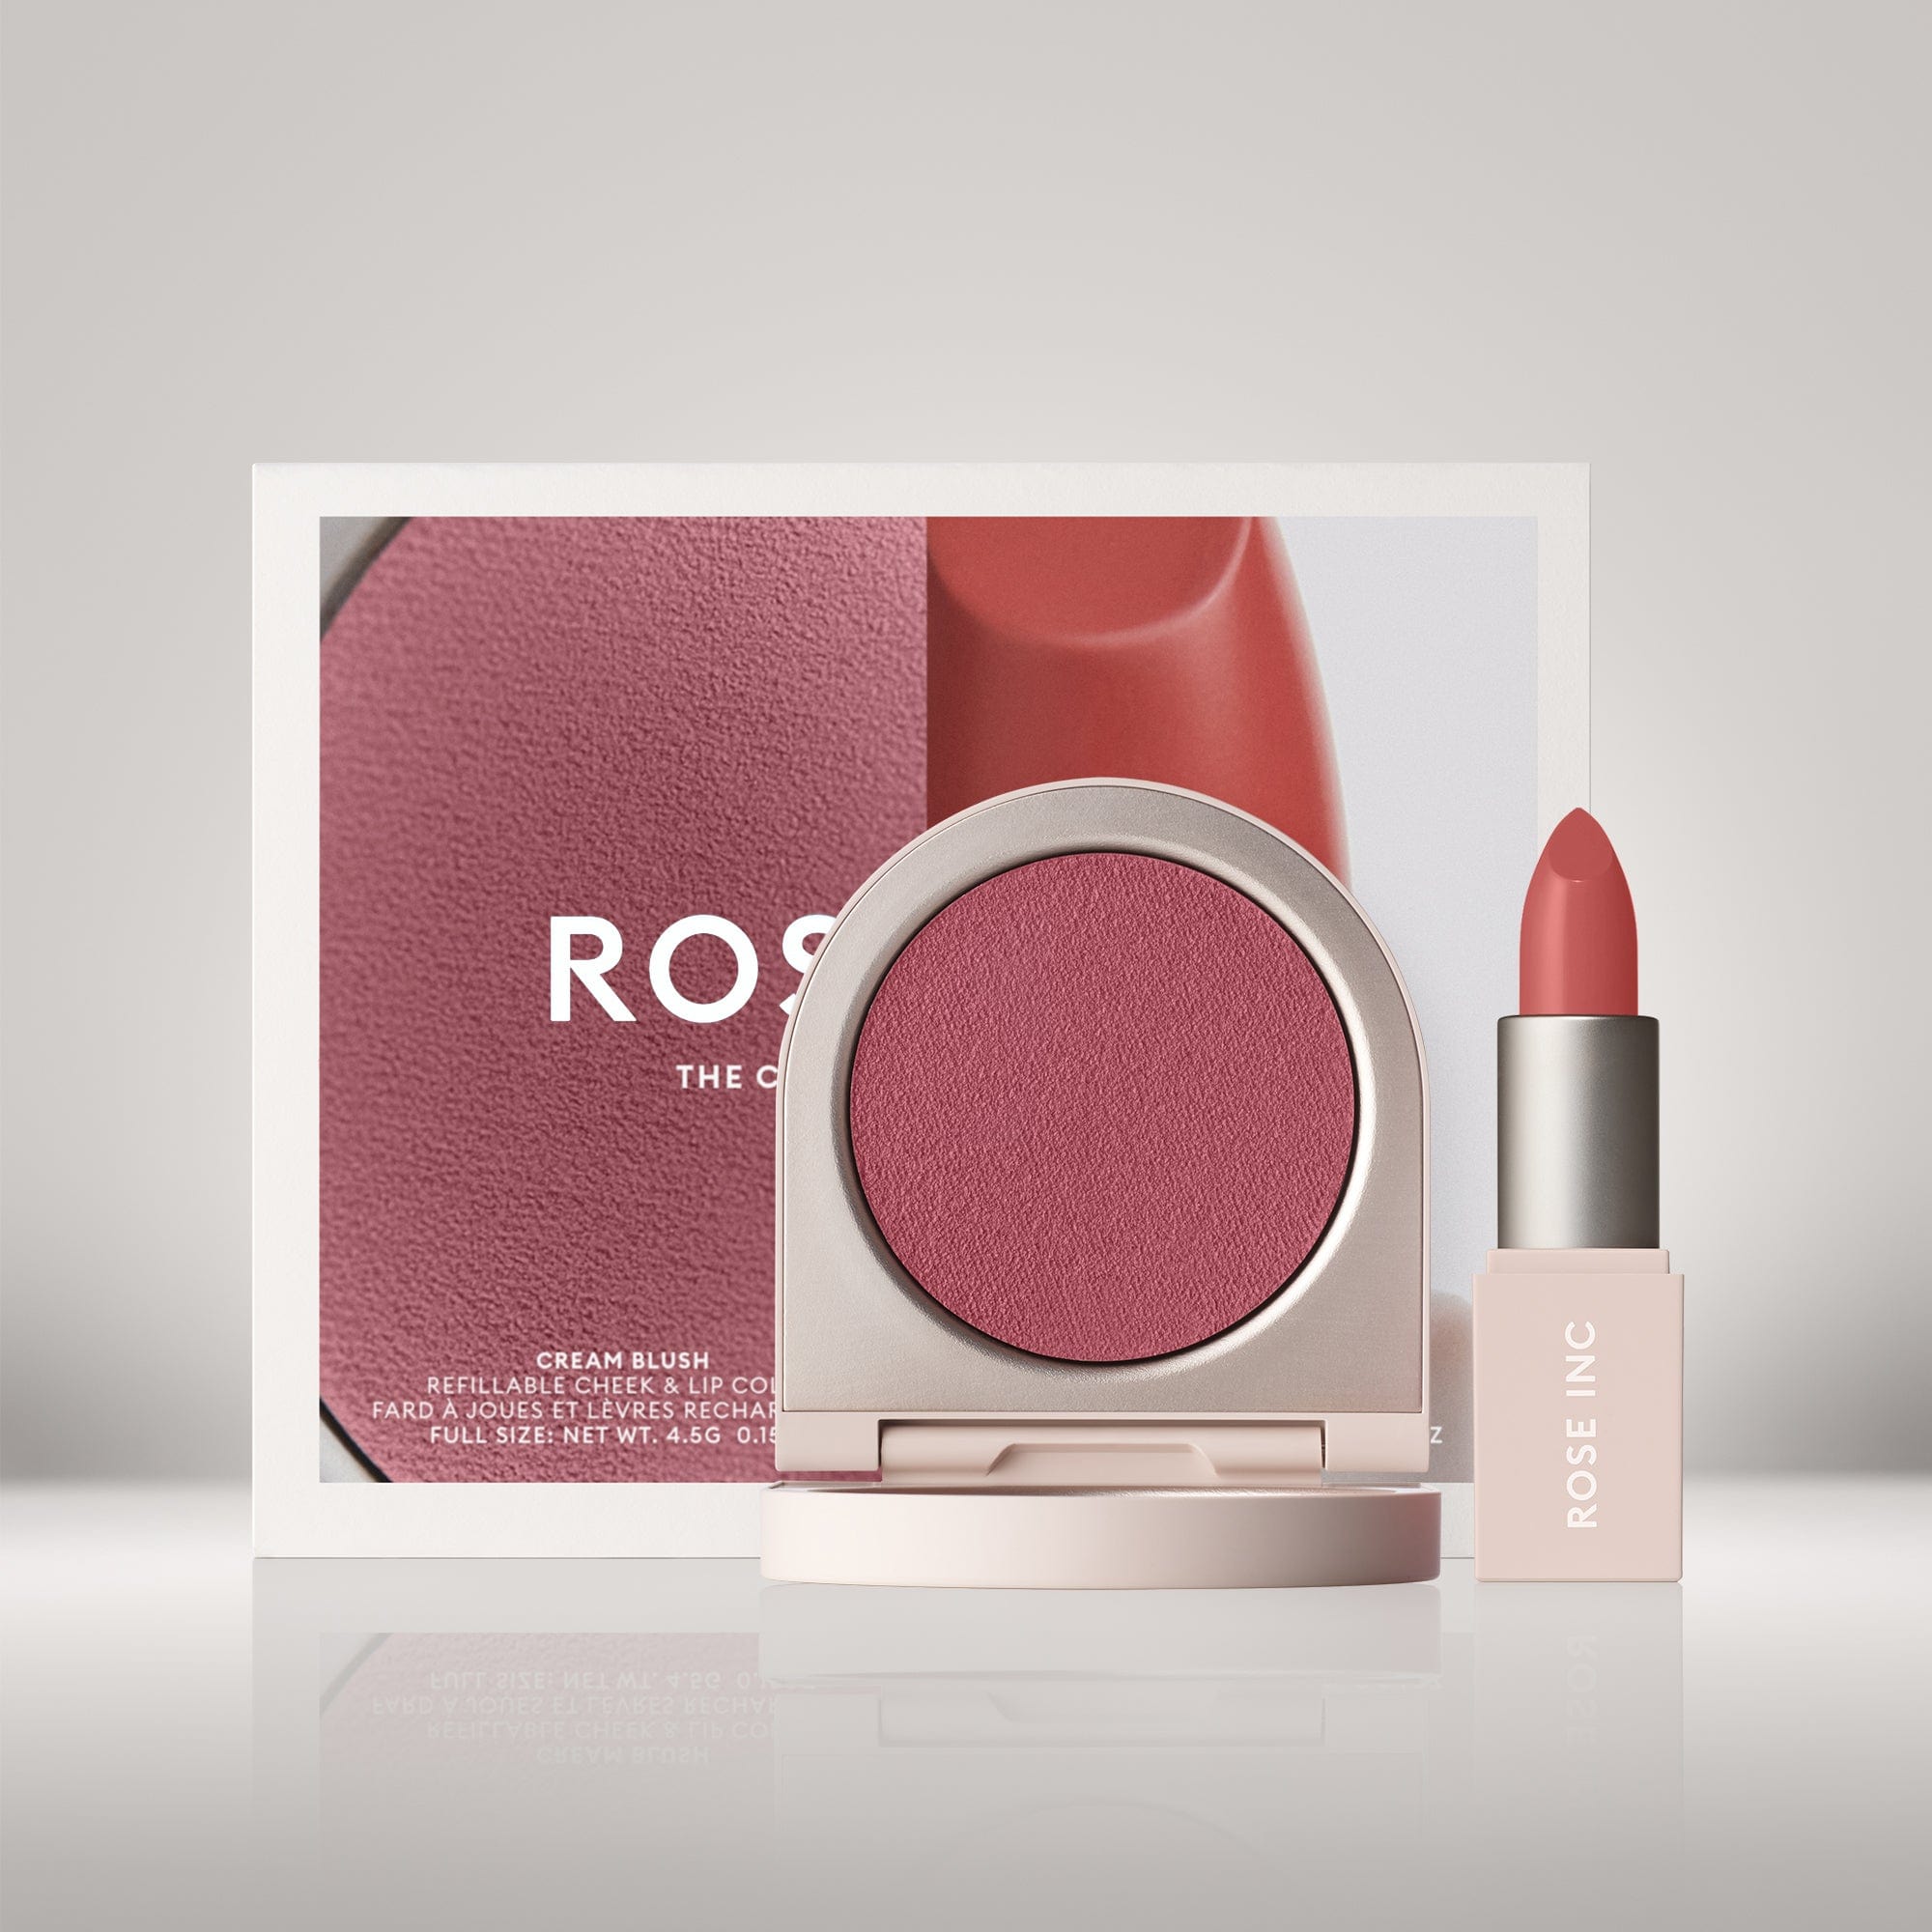 Set of cream blush in hibiscus and satin lip color in poetic.